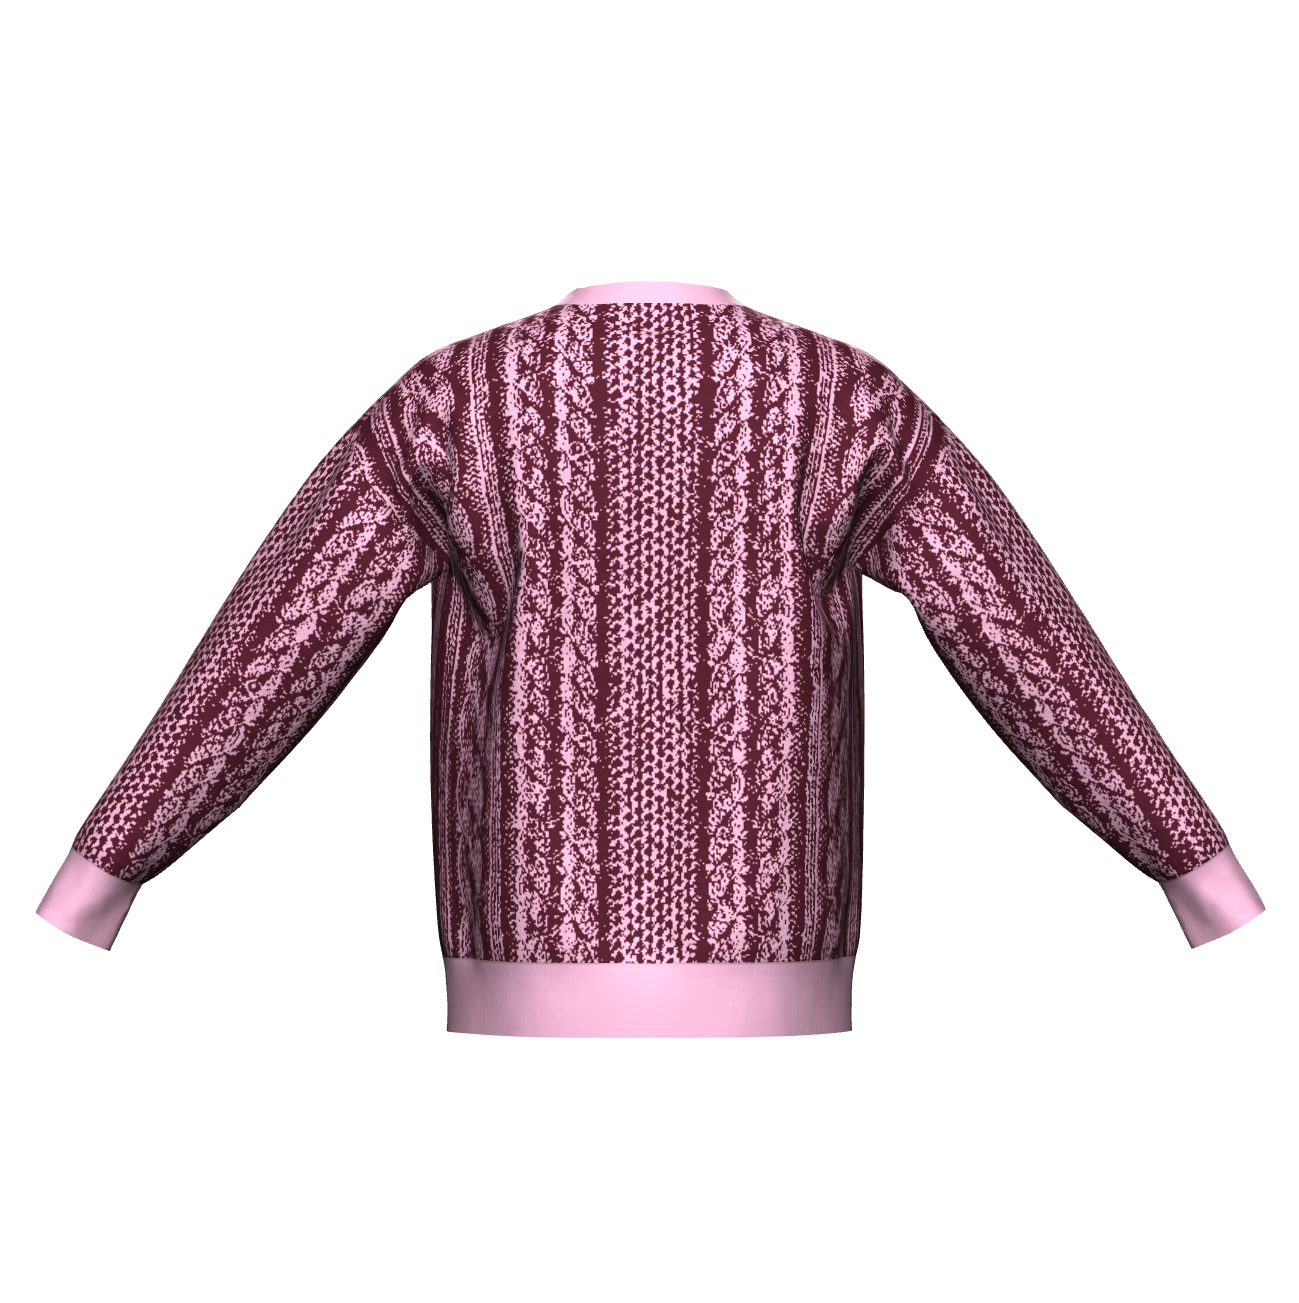 Not-So-Cabled Knit Jumper - Pink